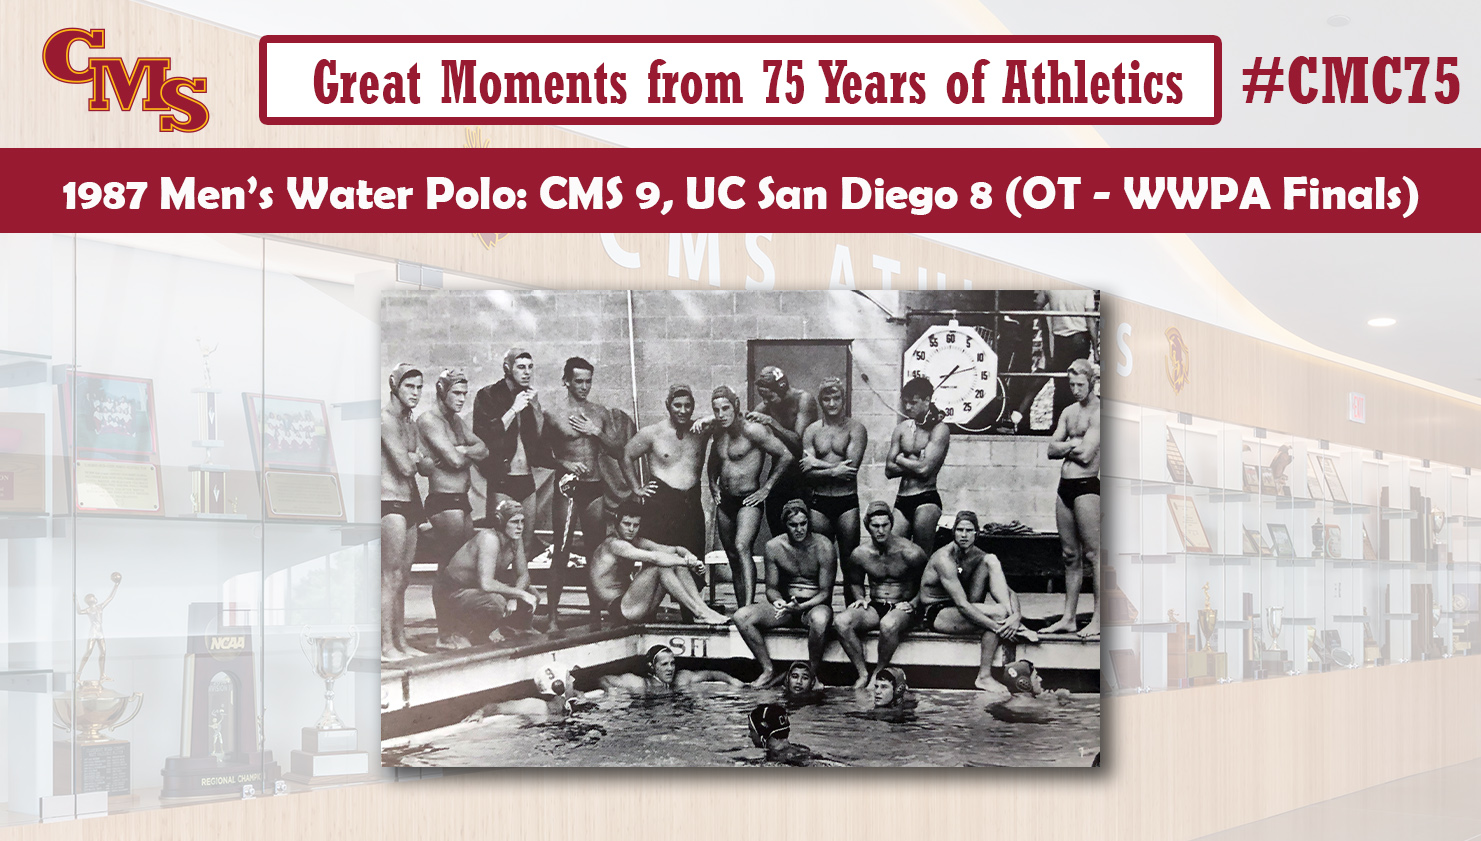 A team photo of the 1987 men's water polo team. Words over the photo read: Great Moments from 75 Years of Athletics, 1987 Men's Water Polo: CMS 10, UC San Diego 9 (OT - WWPA Finals)